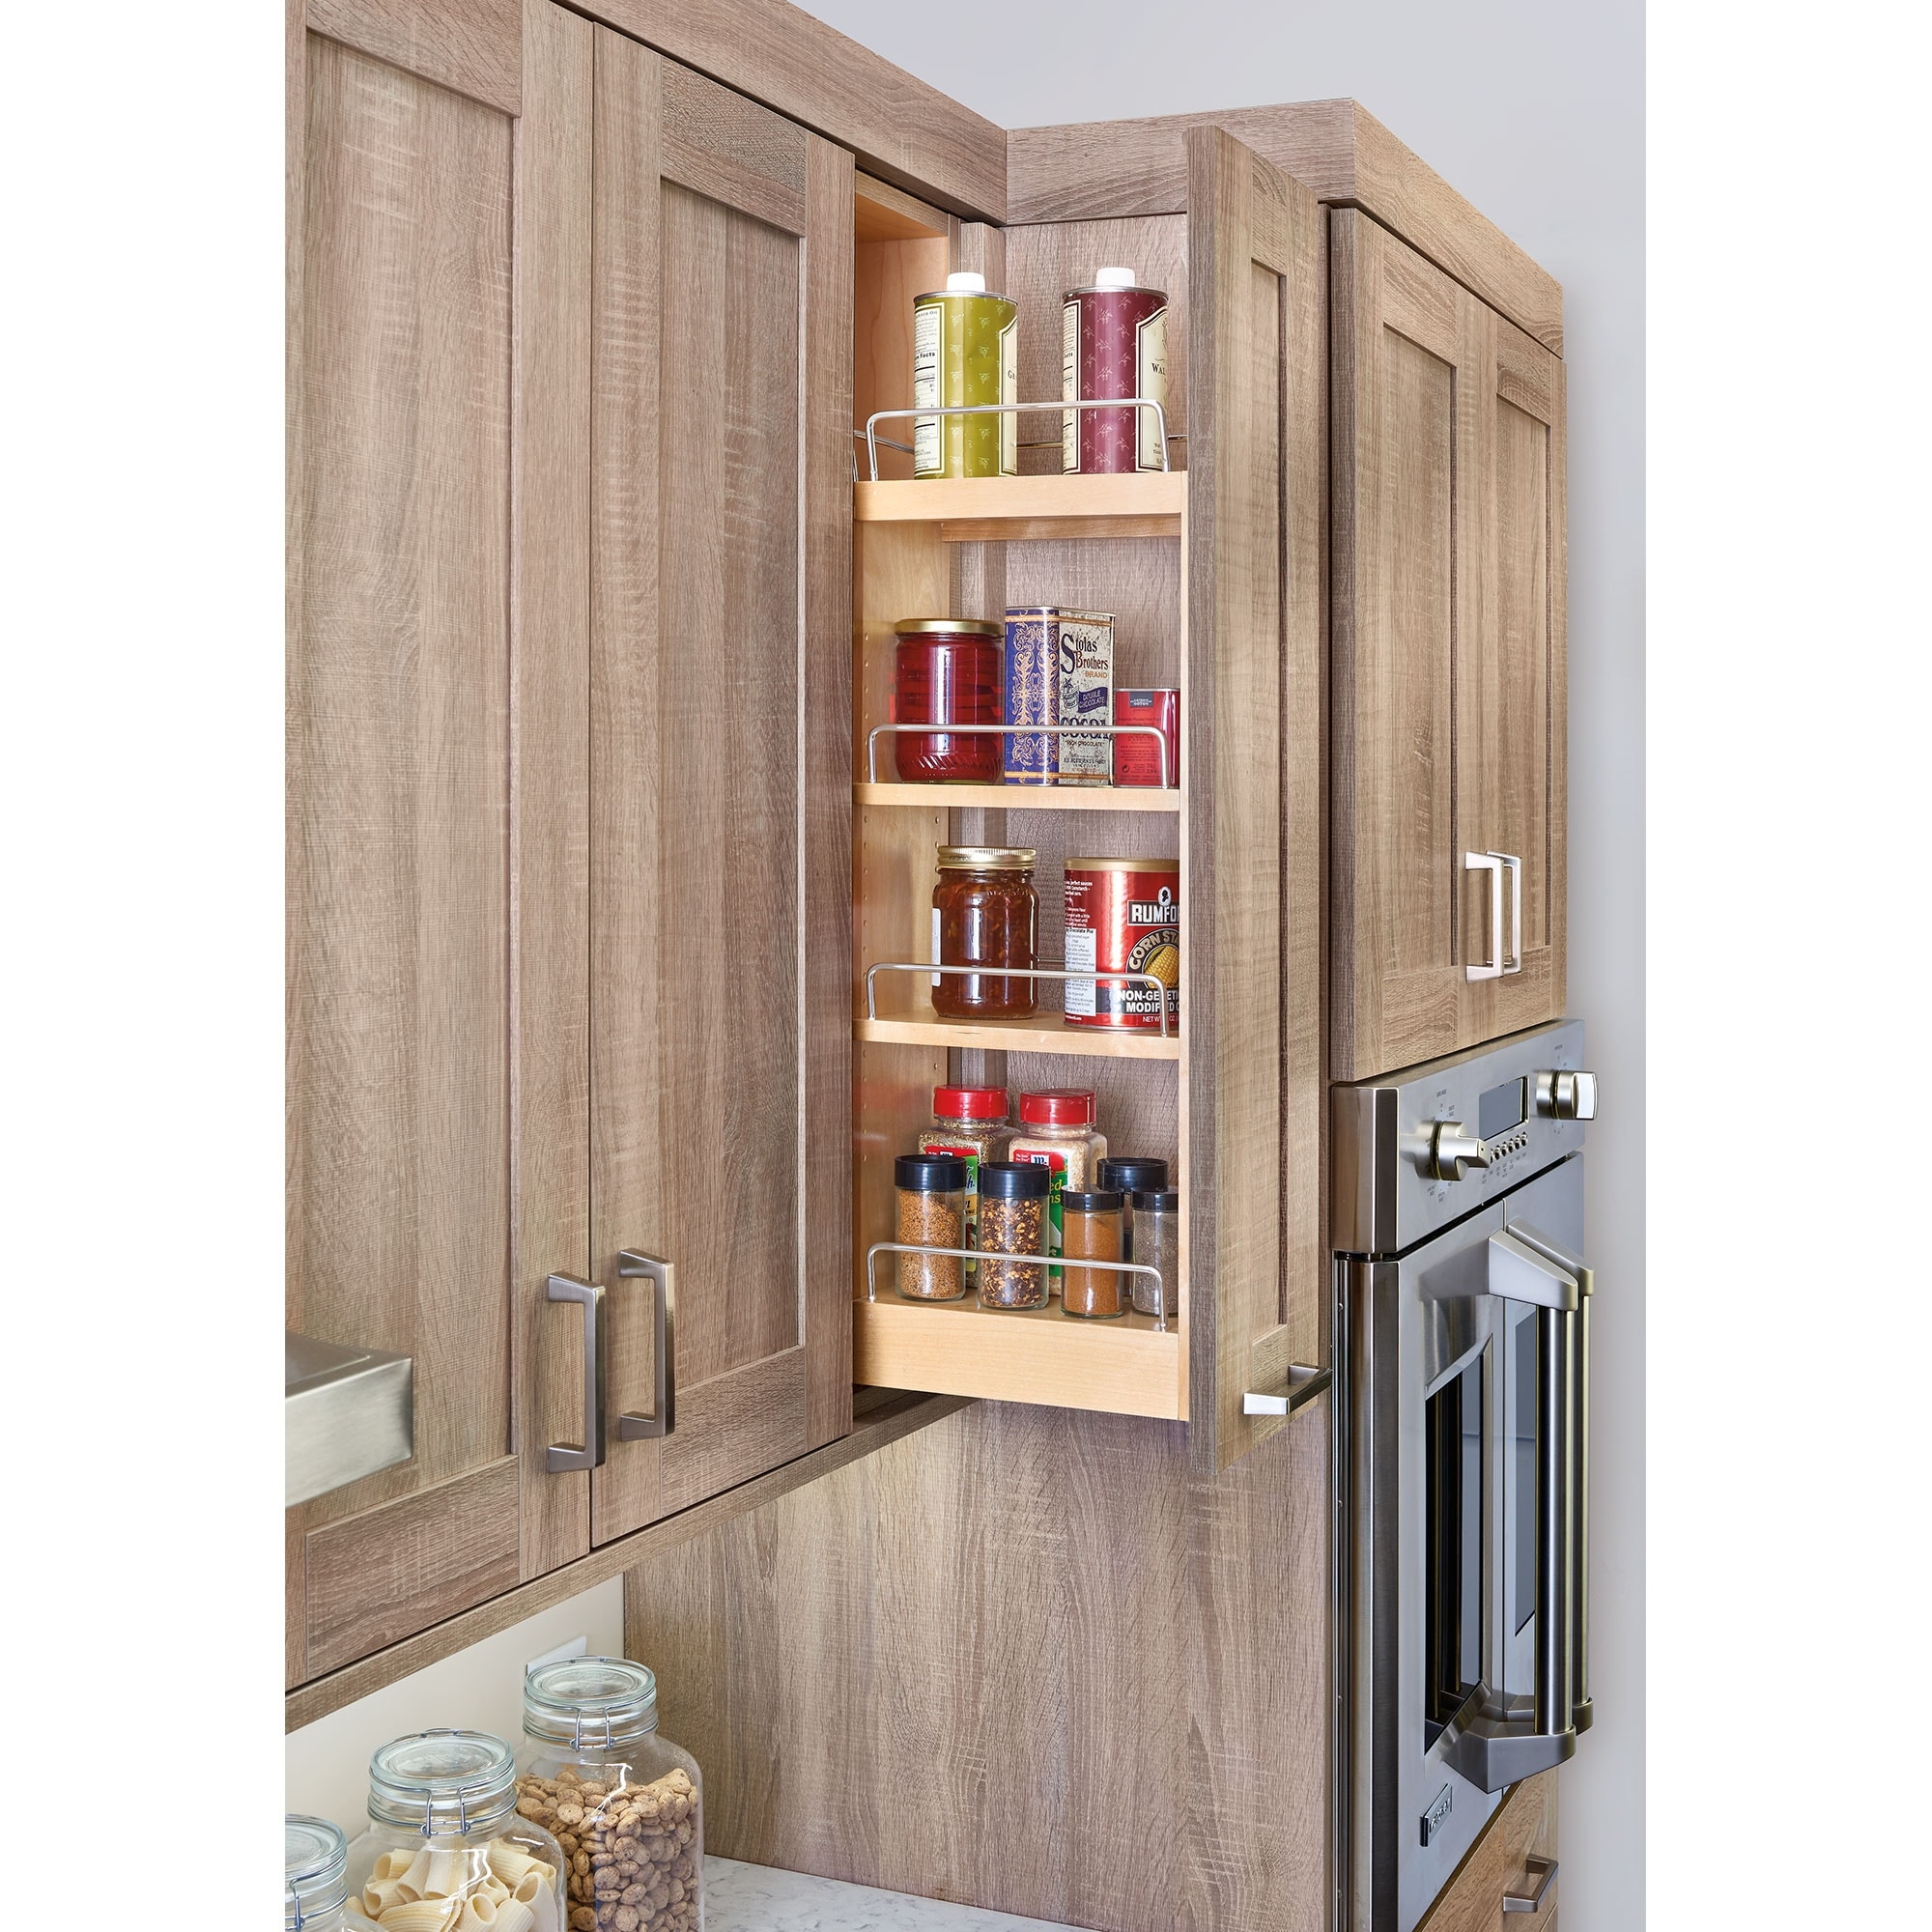 https://ak1.ostkcdn.com/images/products/is/images/direct/10bb067d92bf2bbecc61e76f3d90f02184e44267/Rev-A-Shelf-Wooden-Wall-Cabinet-Pull-Out-Organizer-for-Kitchen-with-Soft-Close.jpg